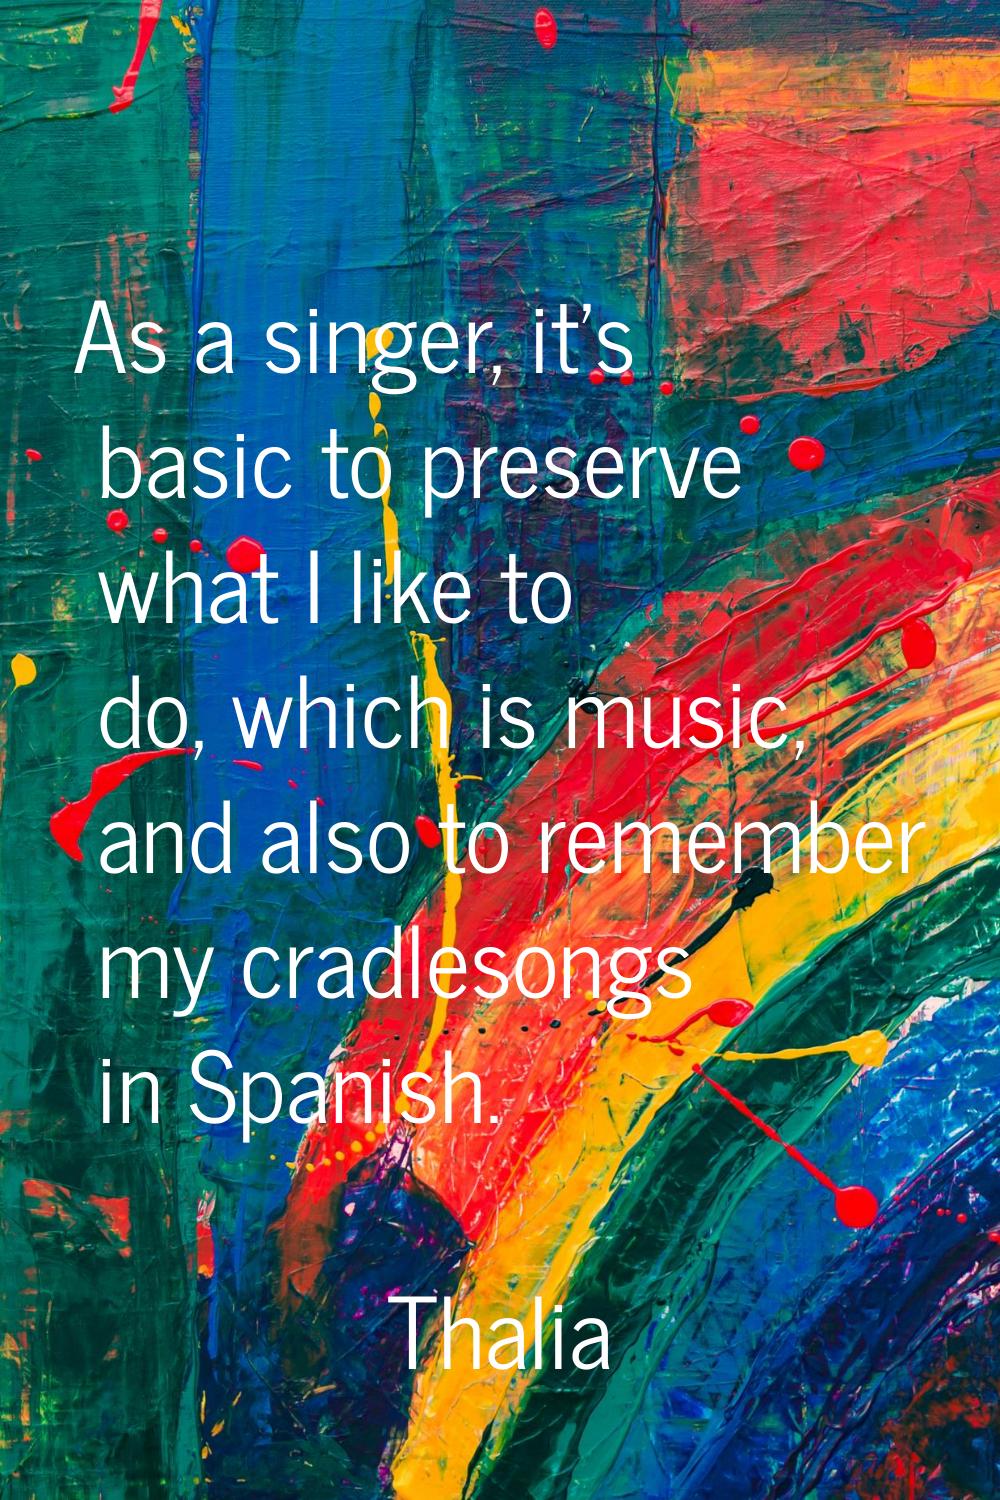 As a singer, it's basic to preserve what I like to do, which is music, and also to remember my crad